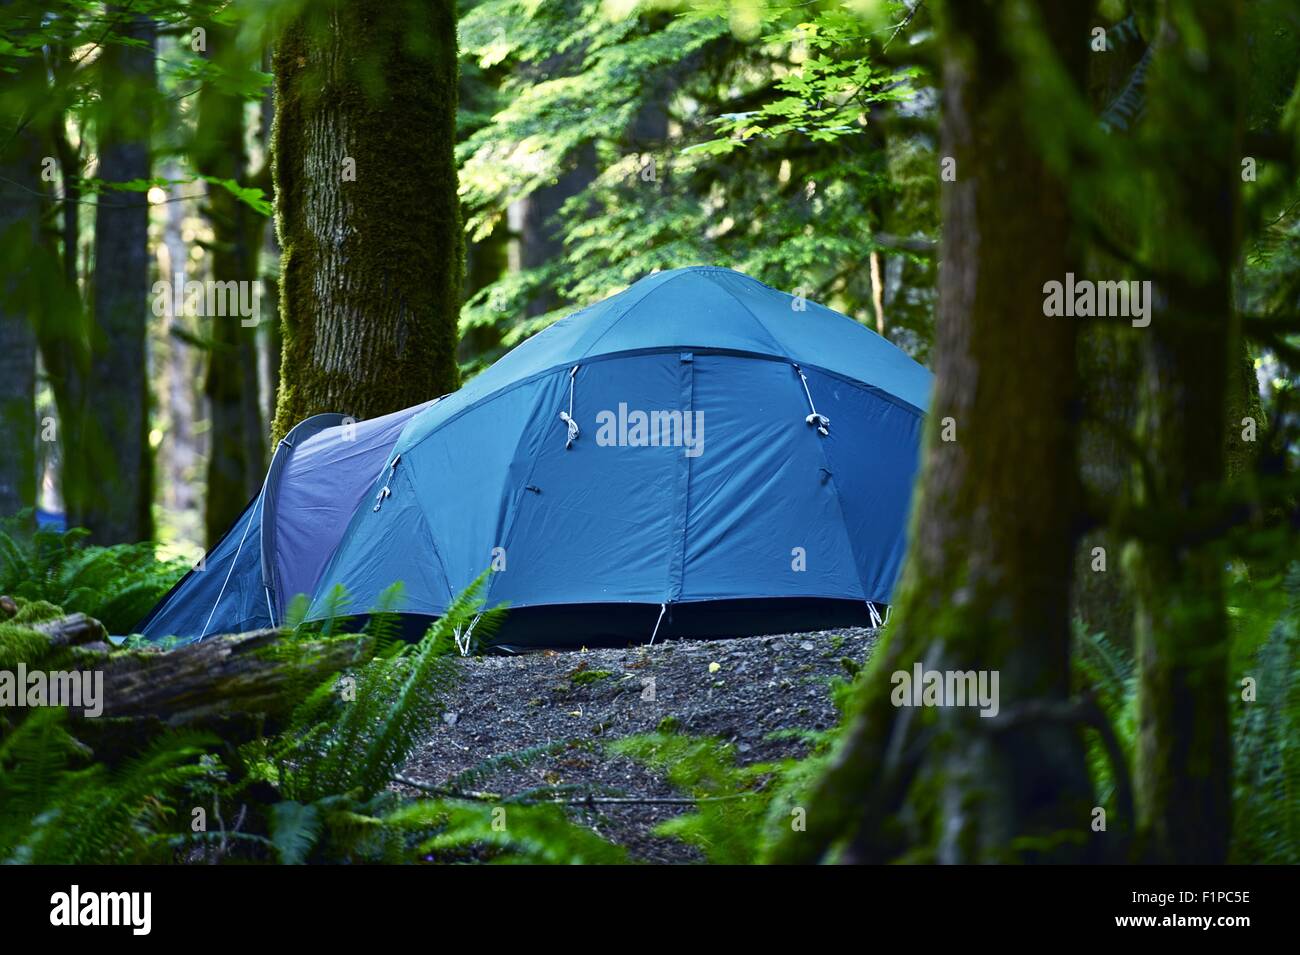 Tent Camping. Large Blue Tent in a Middle of Forest. Outdoor and Recreation Photo Collection. Washington State Forest. Stock Photo